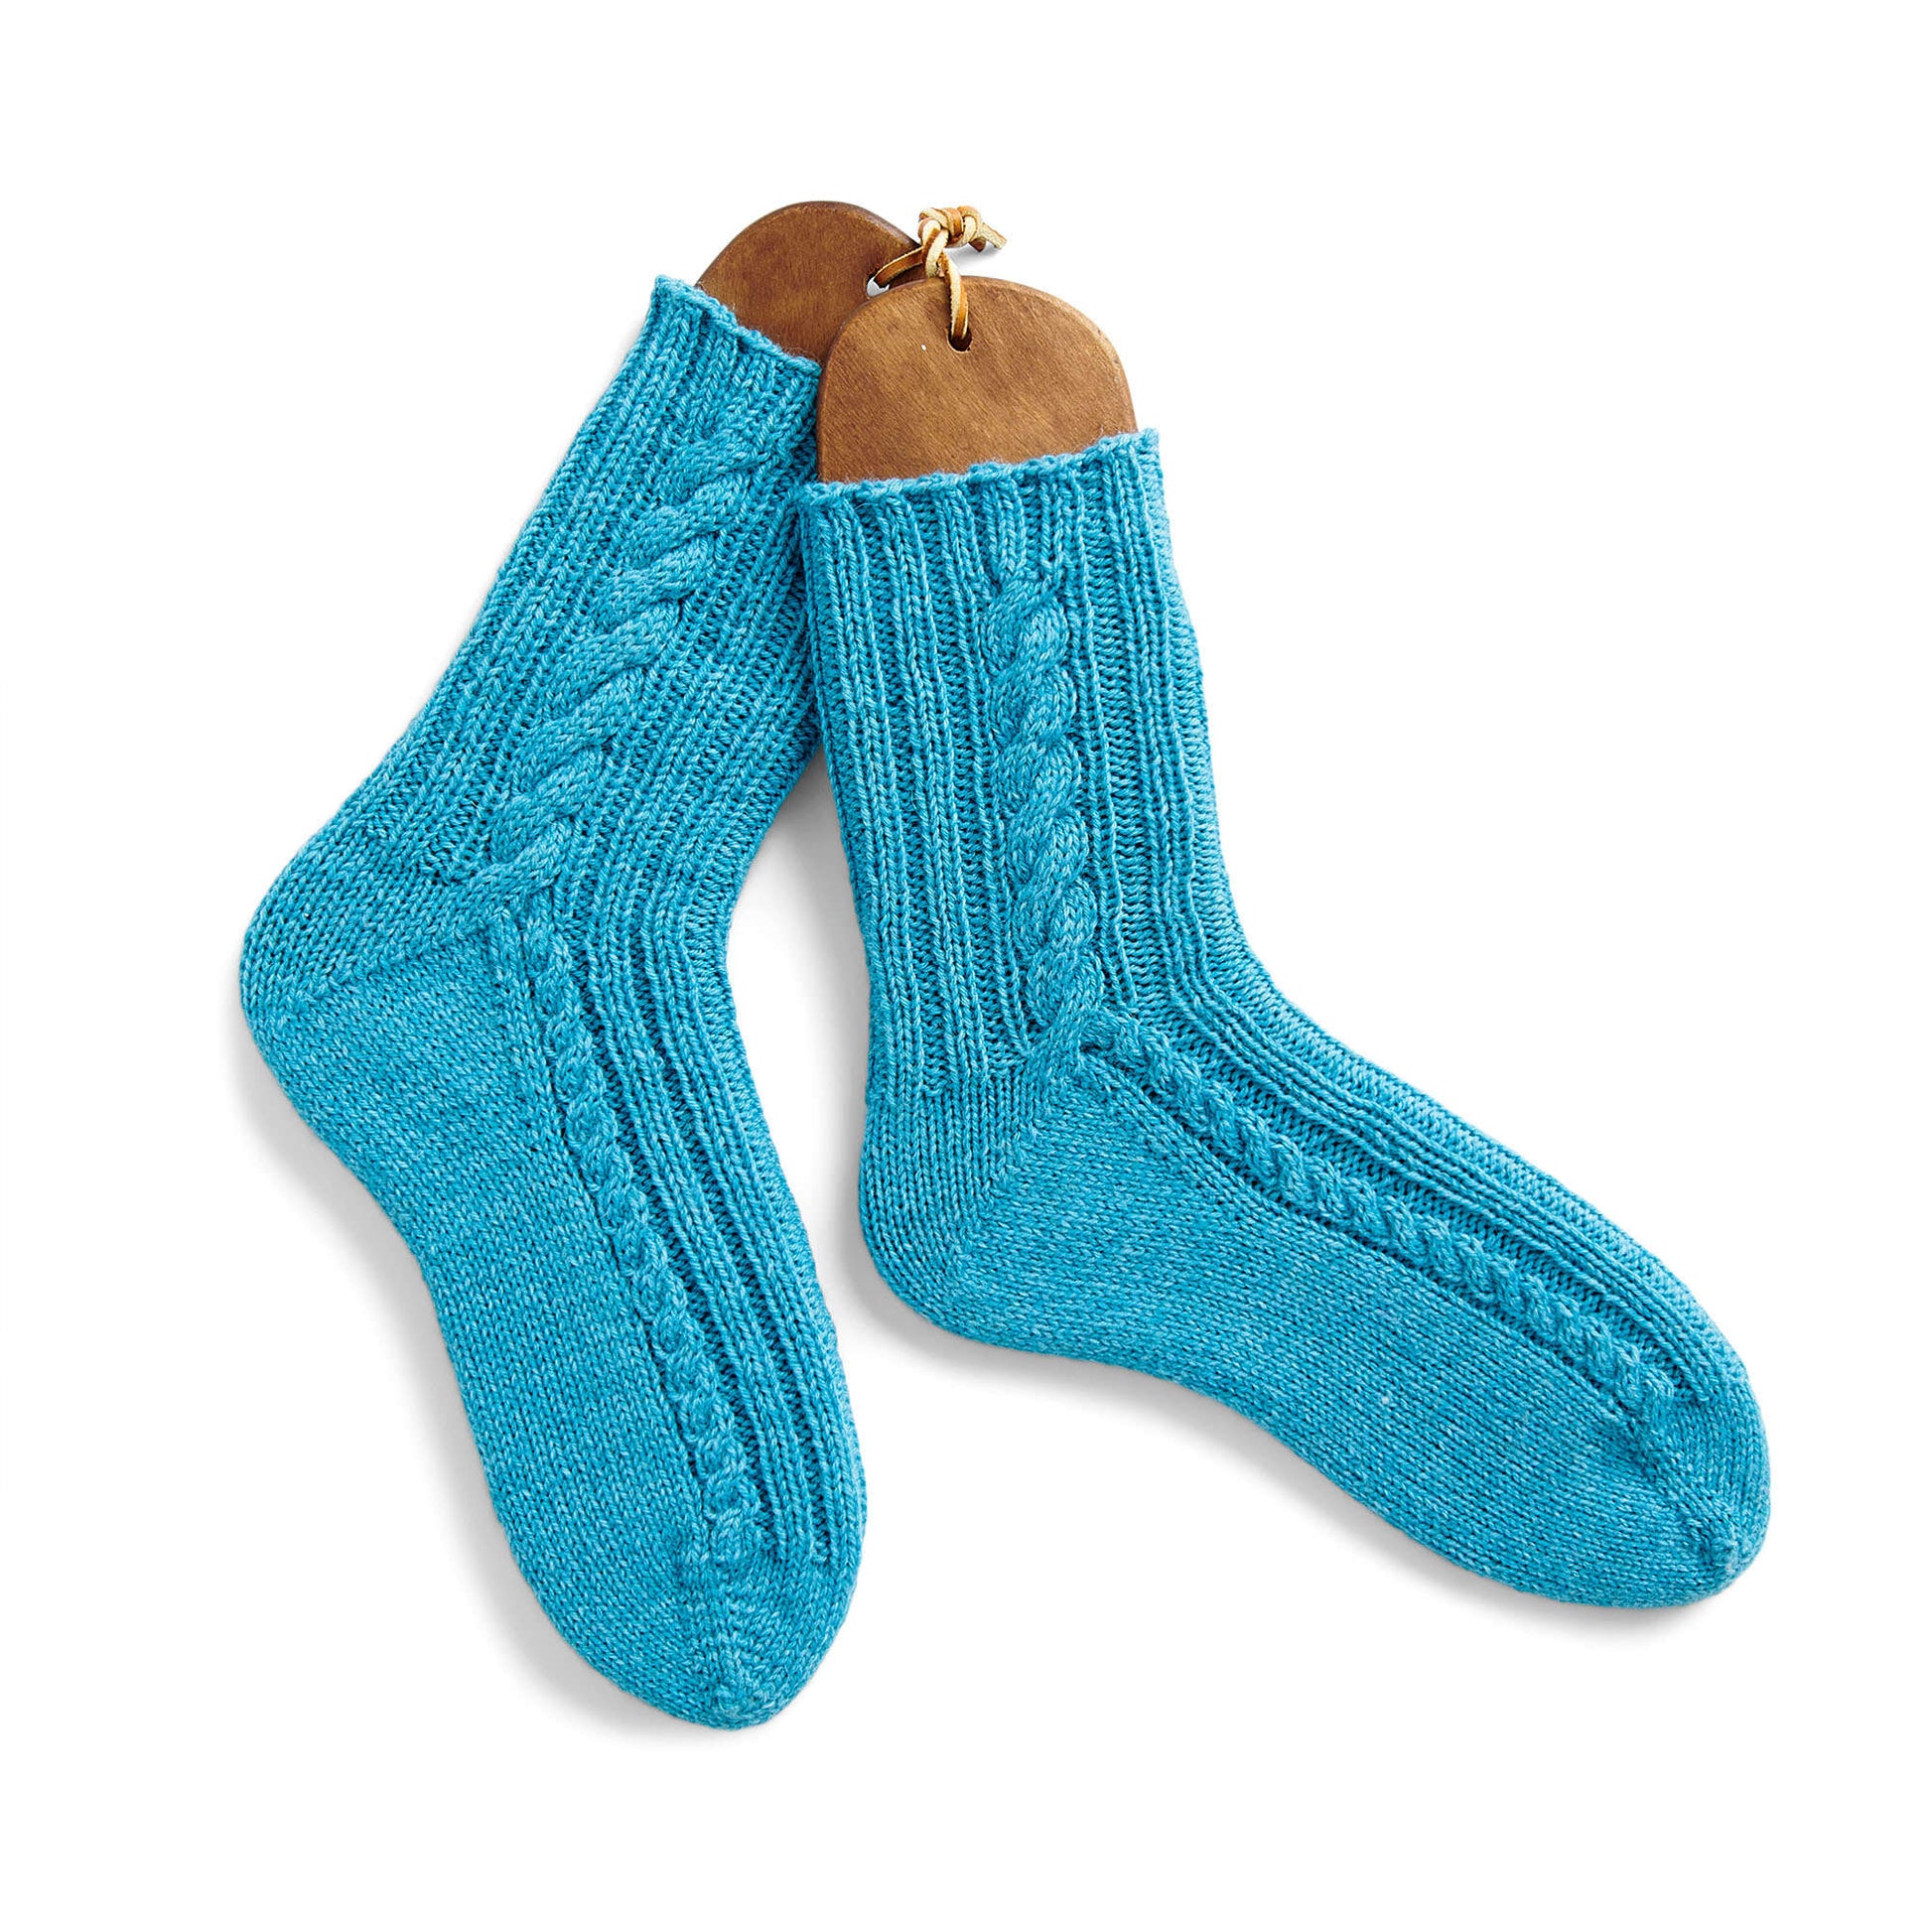 Free Patons Toe-Up Cabled Knit Socks Pattern